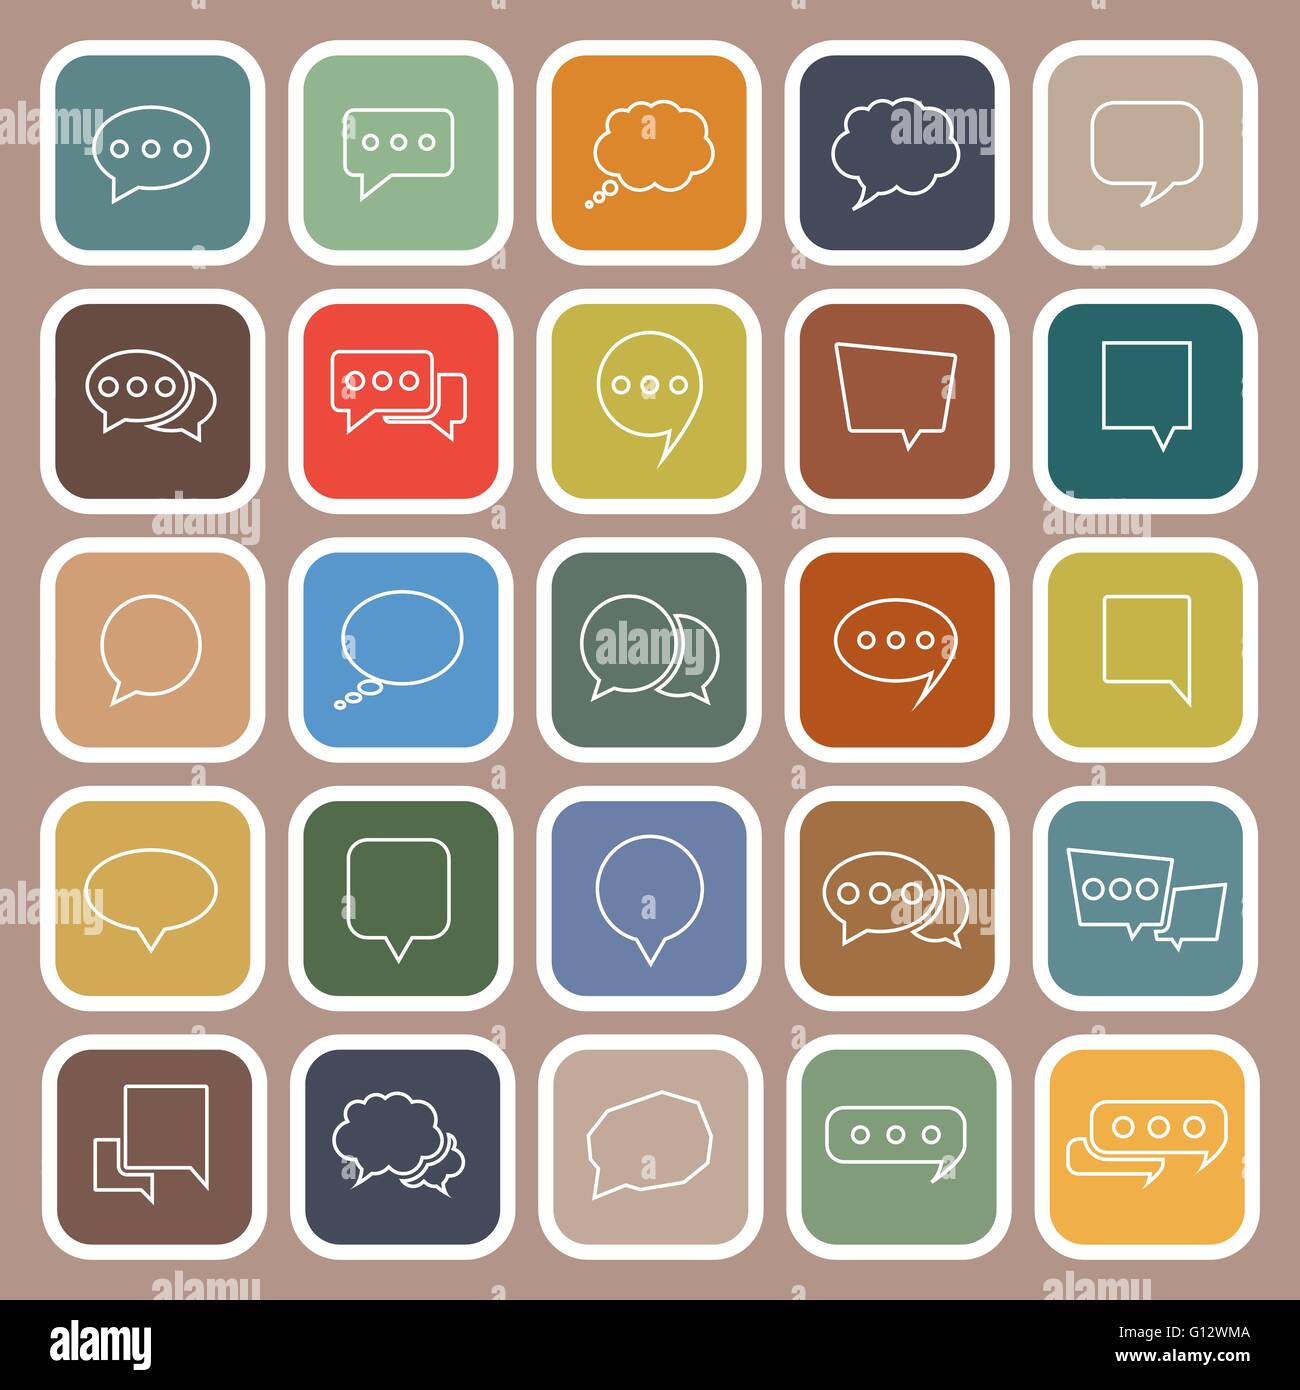 Speech Bubble line flat icons on brown background, stock vector Stock Vector